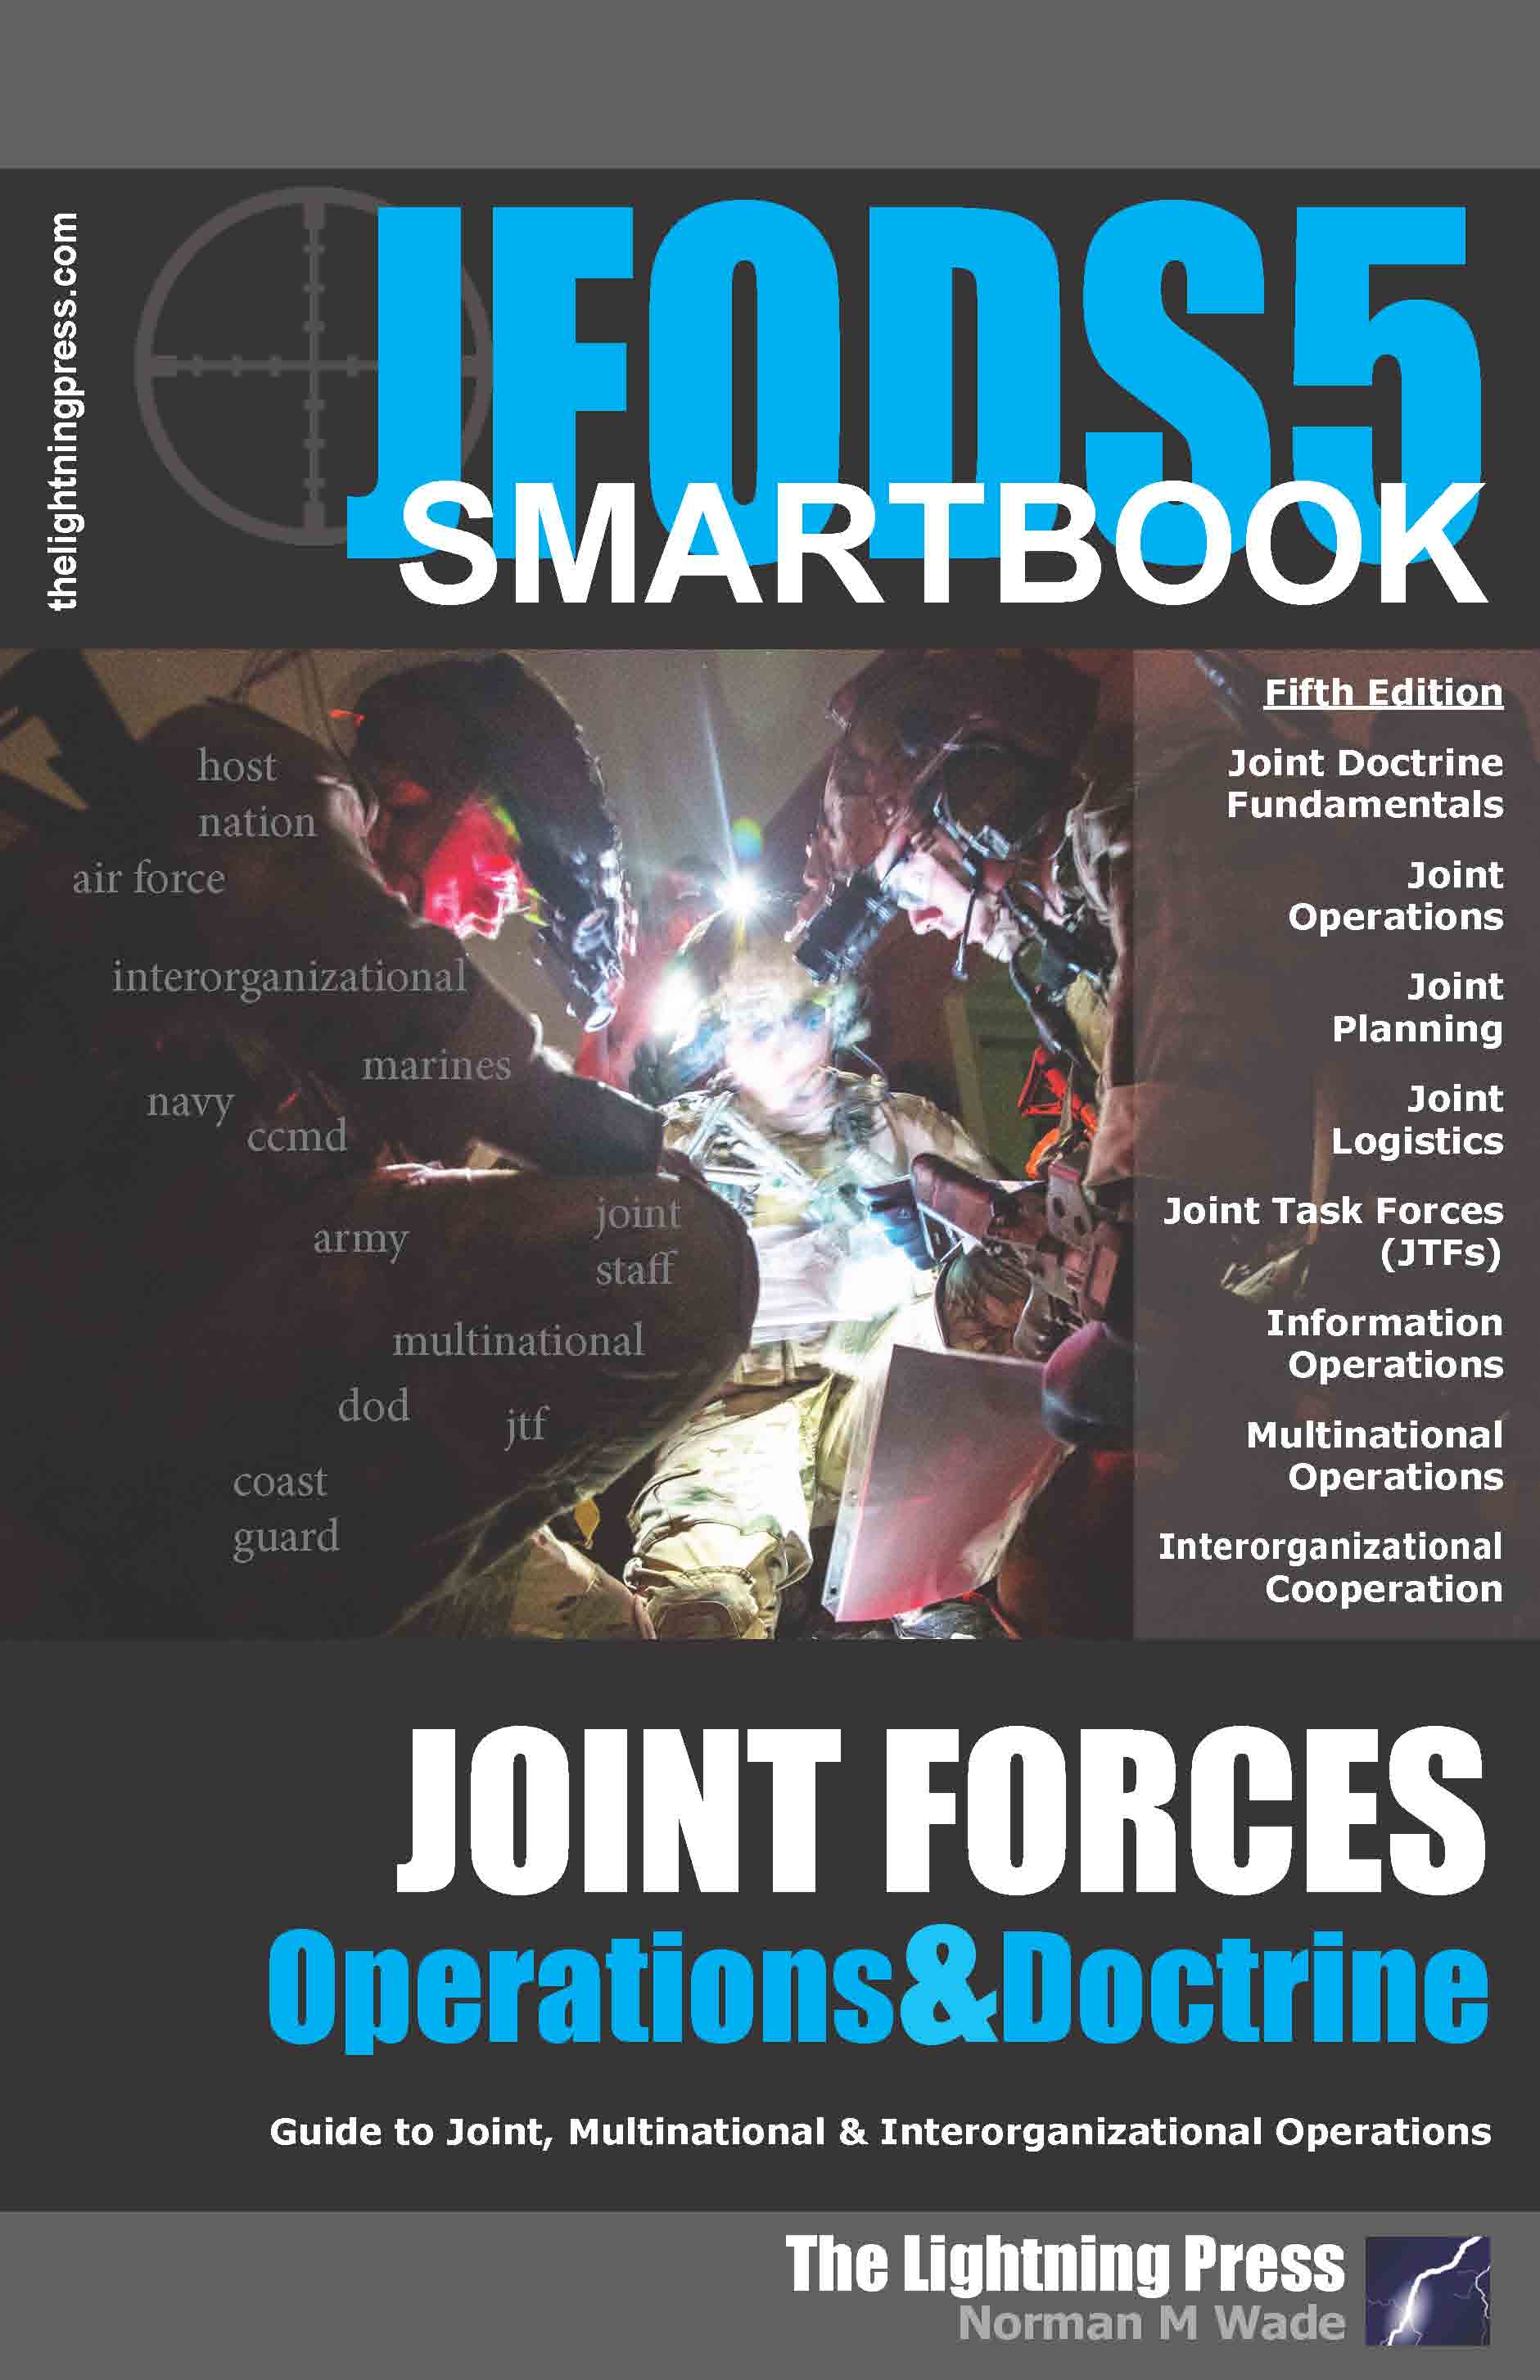 JFODS5: The Joint Forces Operations & Doctrine SMARTbook, 5th Ed.